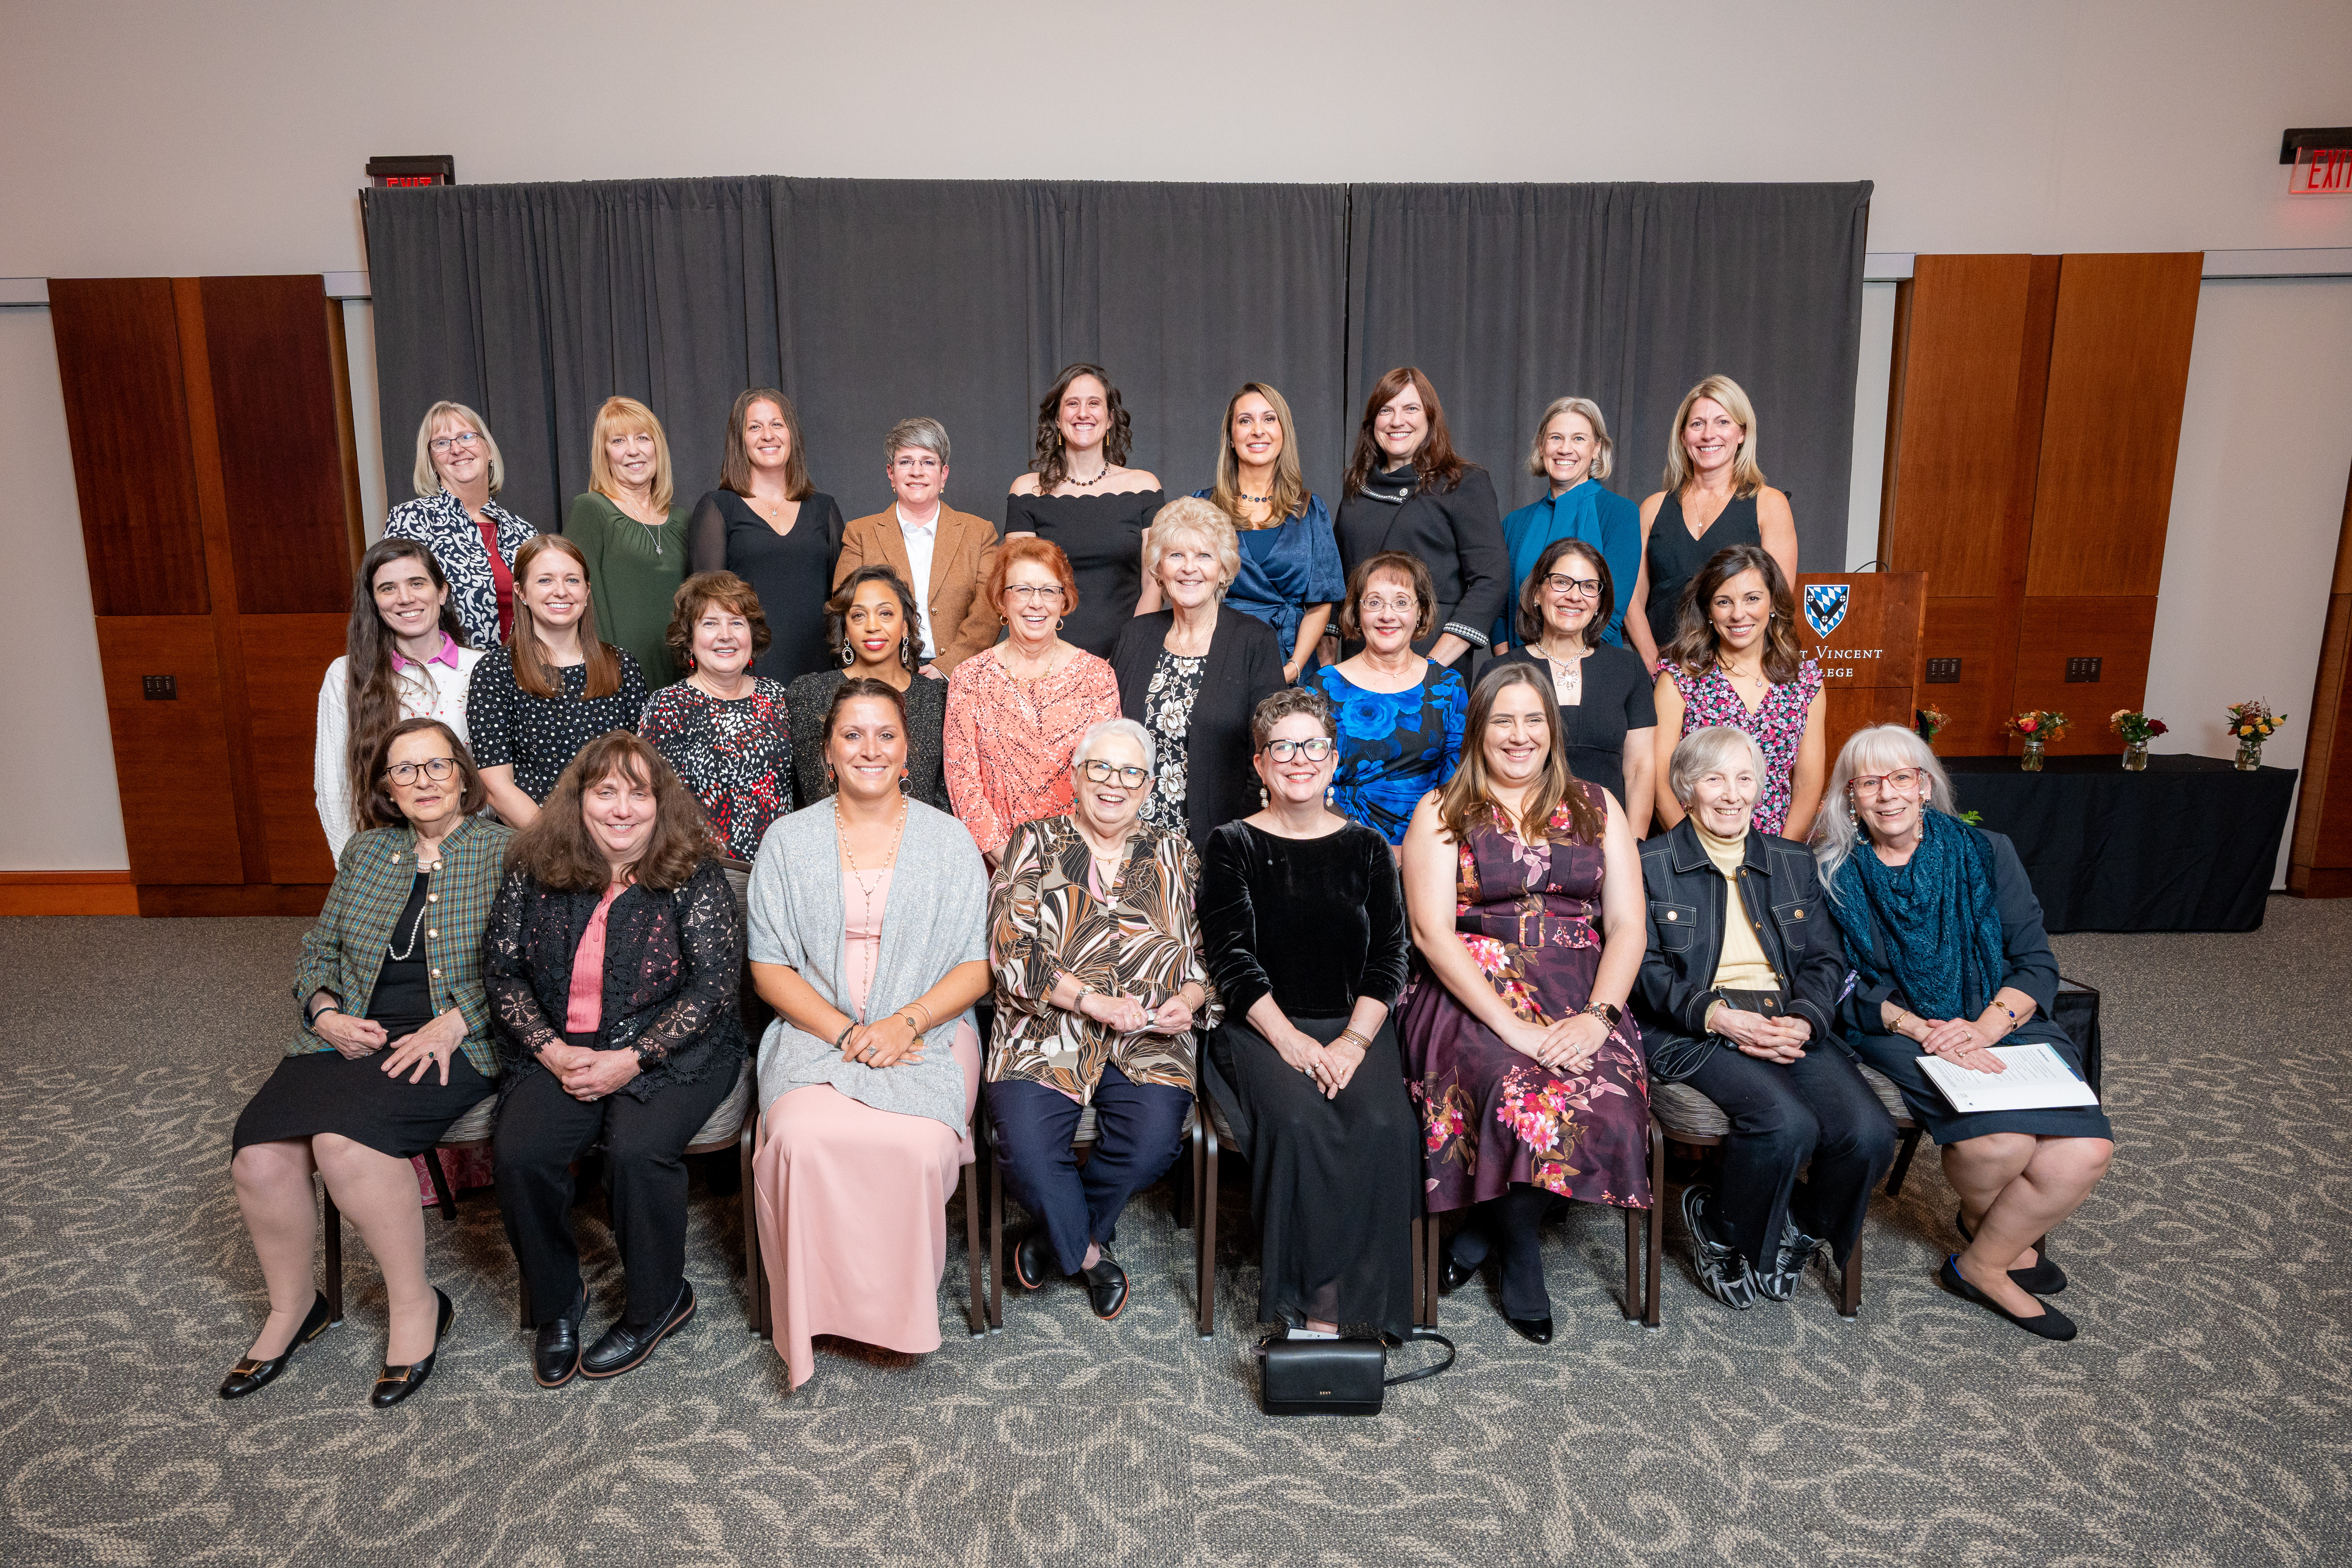 Saint Vincent College honors 40 women as part of 40th anniversary of coeducation celebration